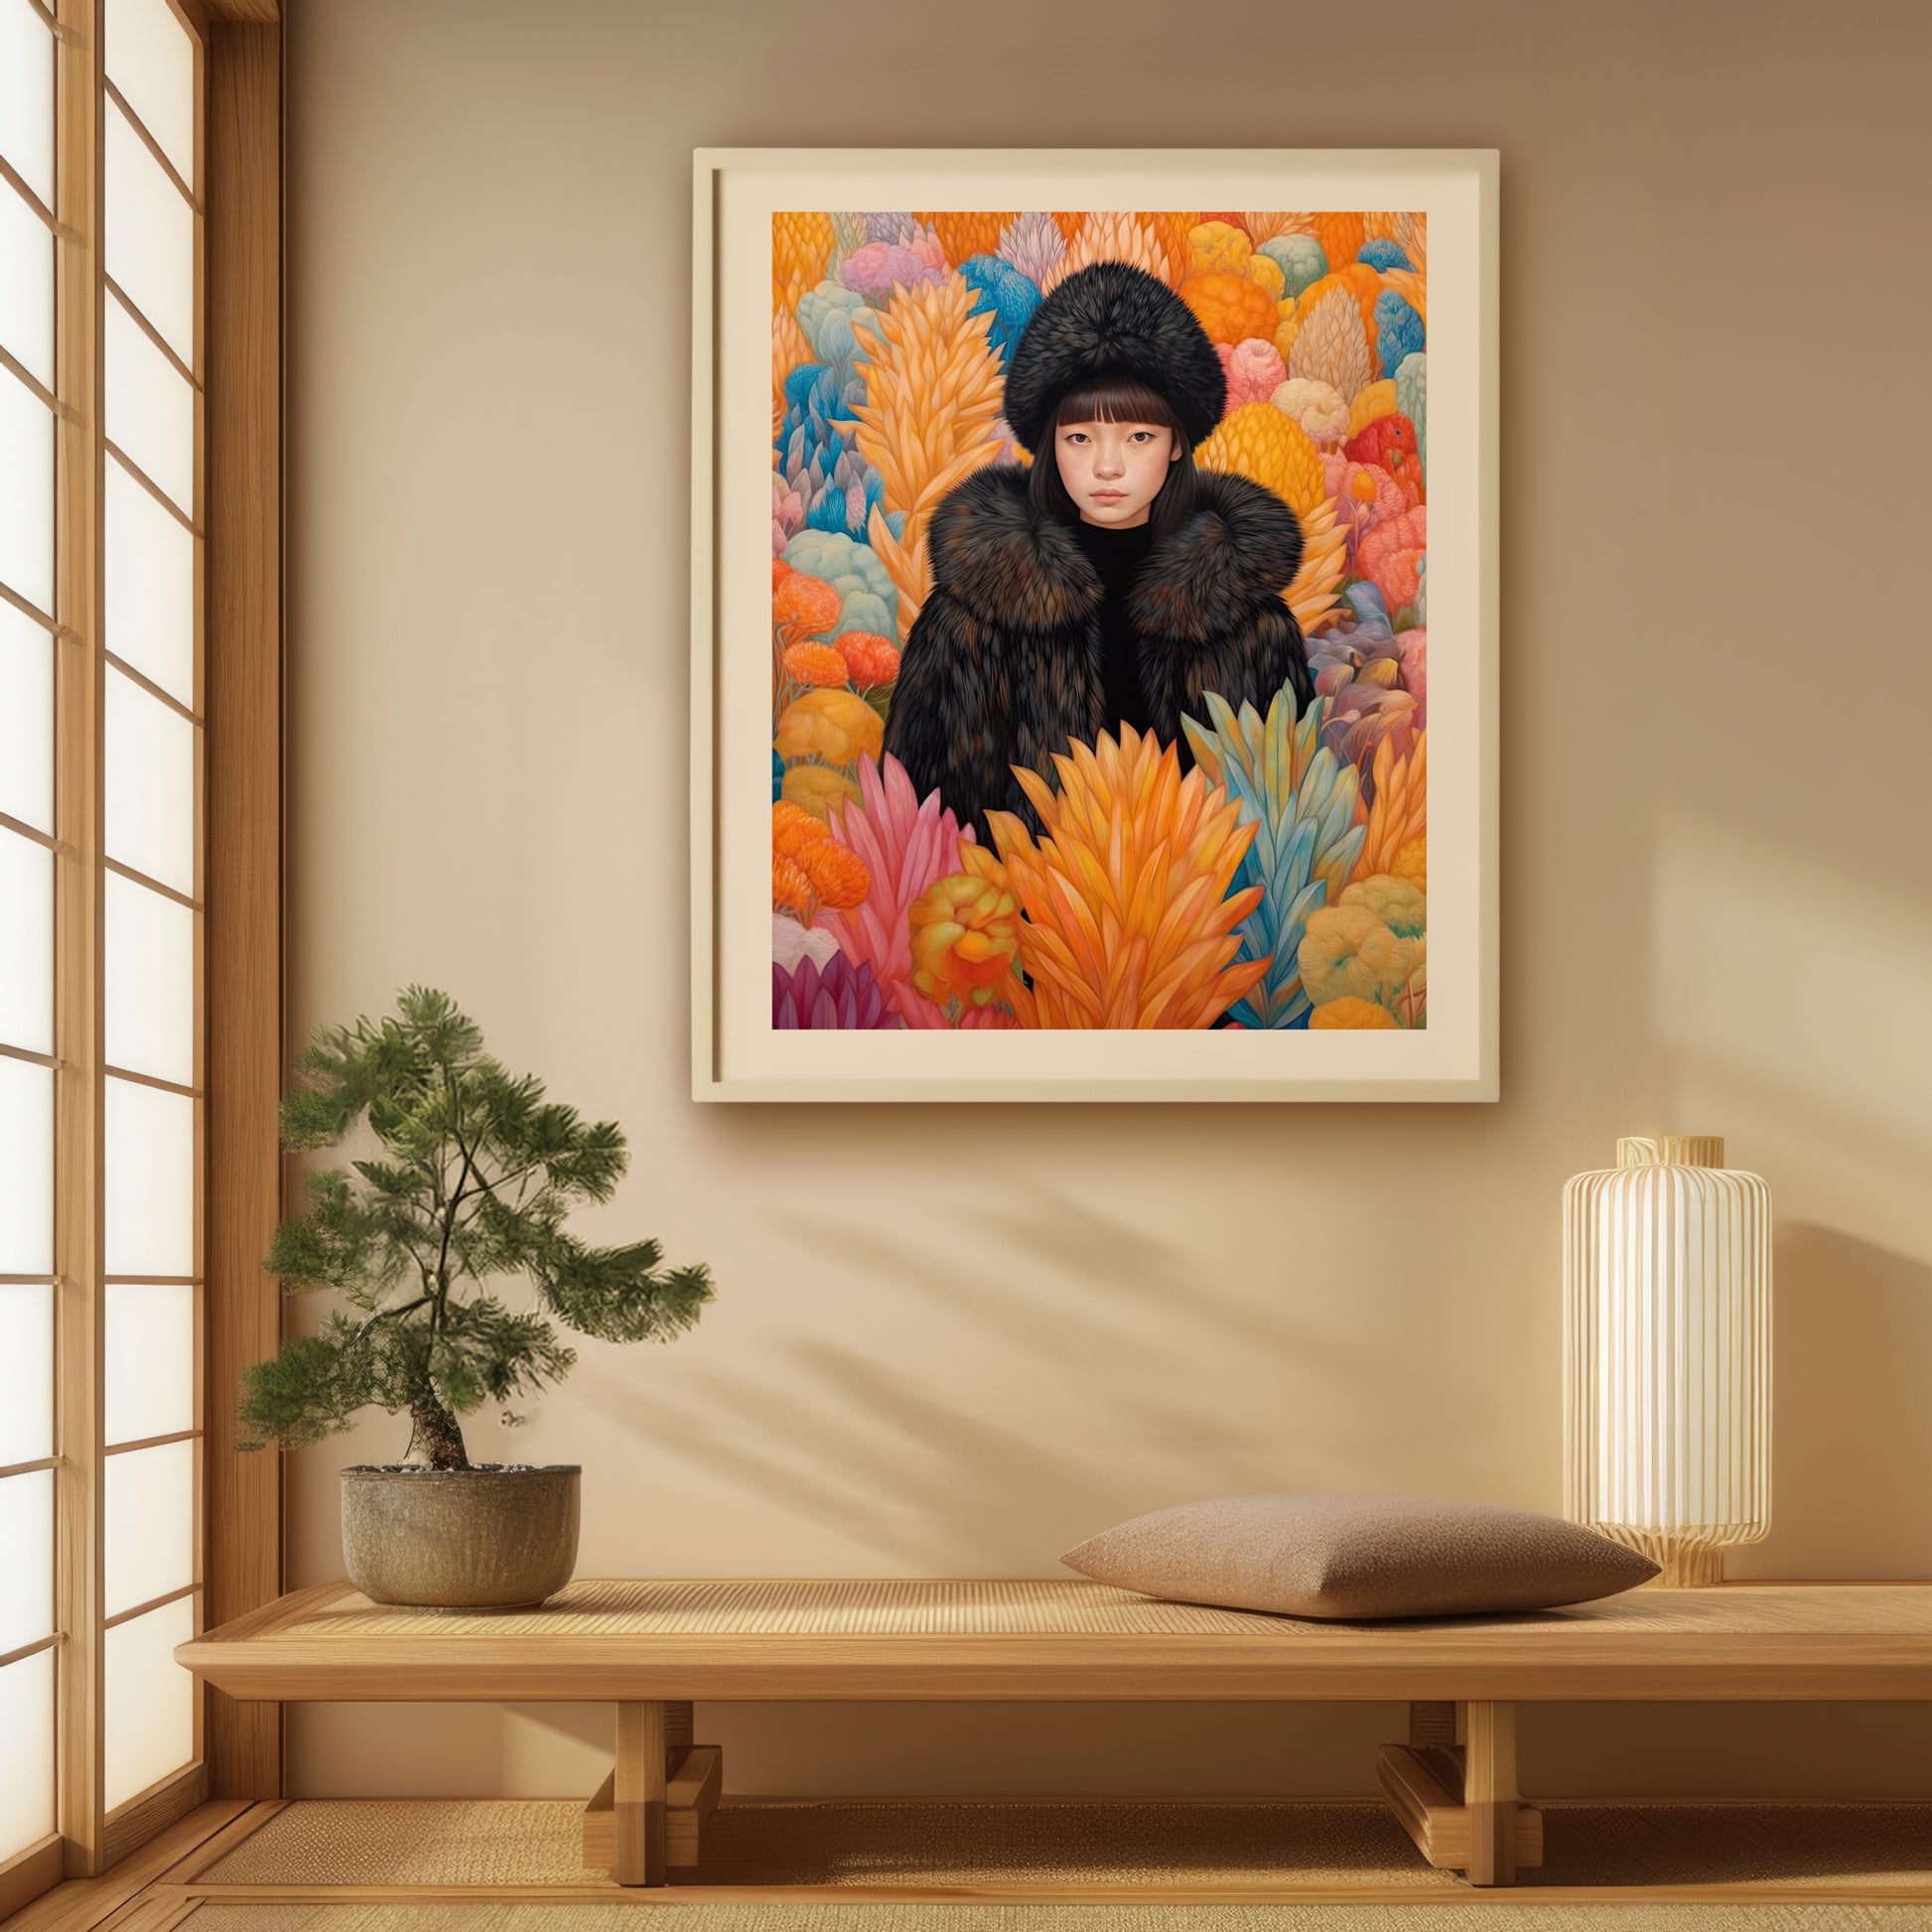 Art print showcasing a woman in a black coat and hat, surrounded by a vibrant, colorful array of oversized, abstract flowers. This fine art print captures a timeless, elegant scene.